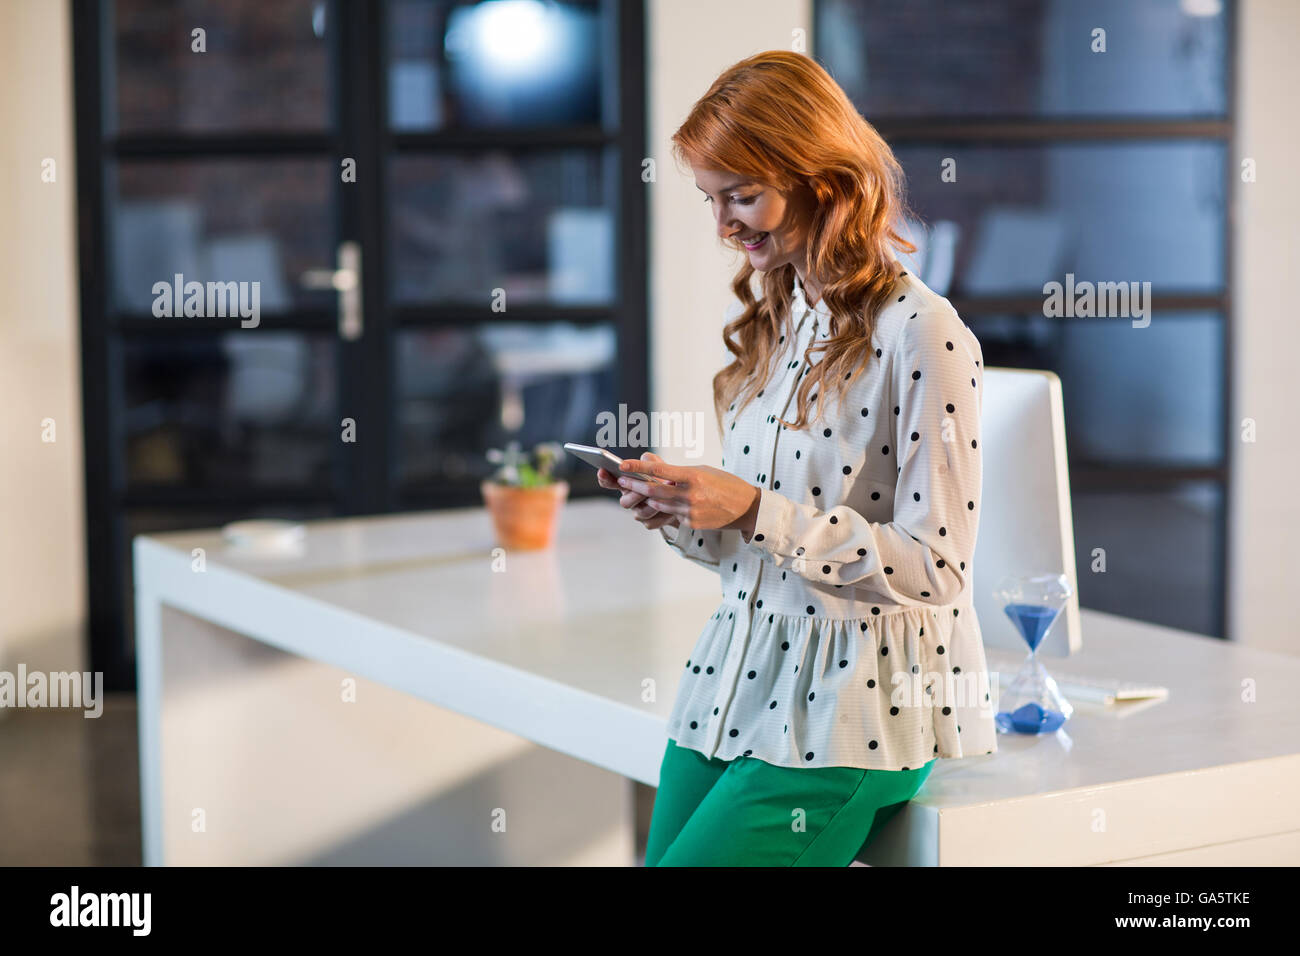 Woman using mobile phone in office Banque D'Images